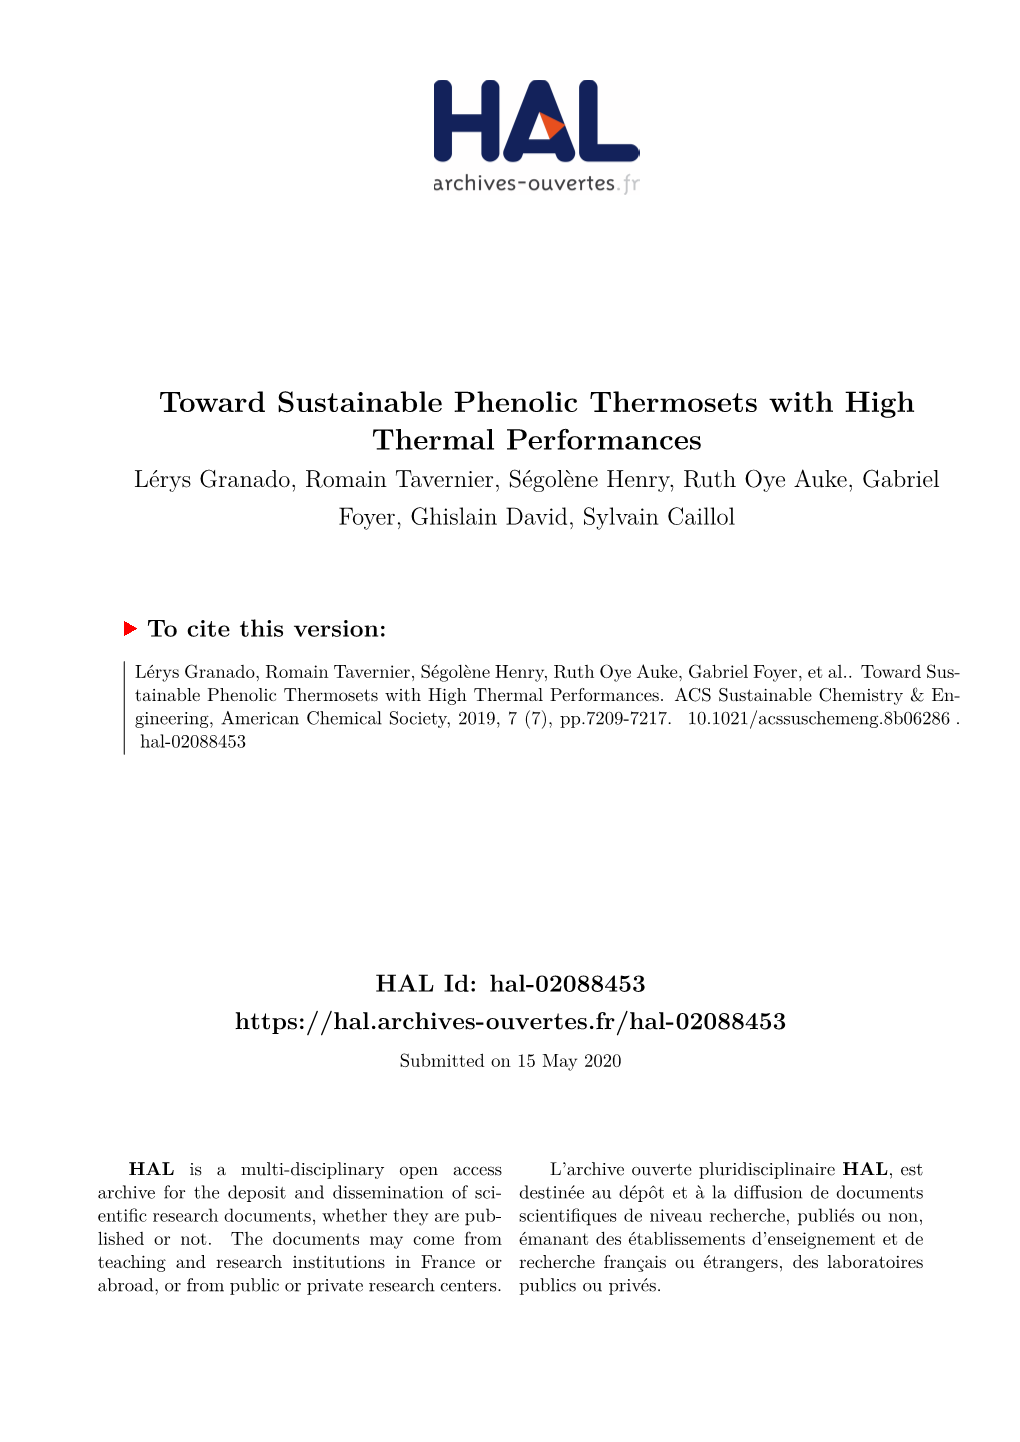 Toward Sustainable Phenolic Thermosets with High Thermal